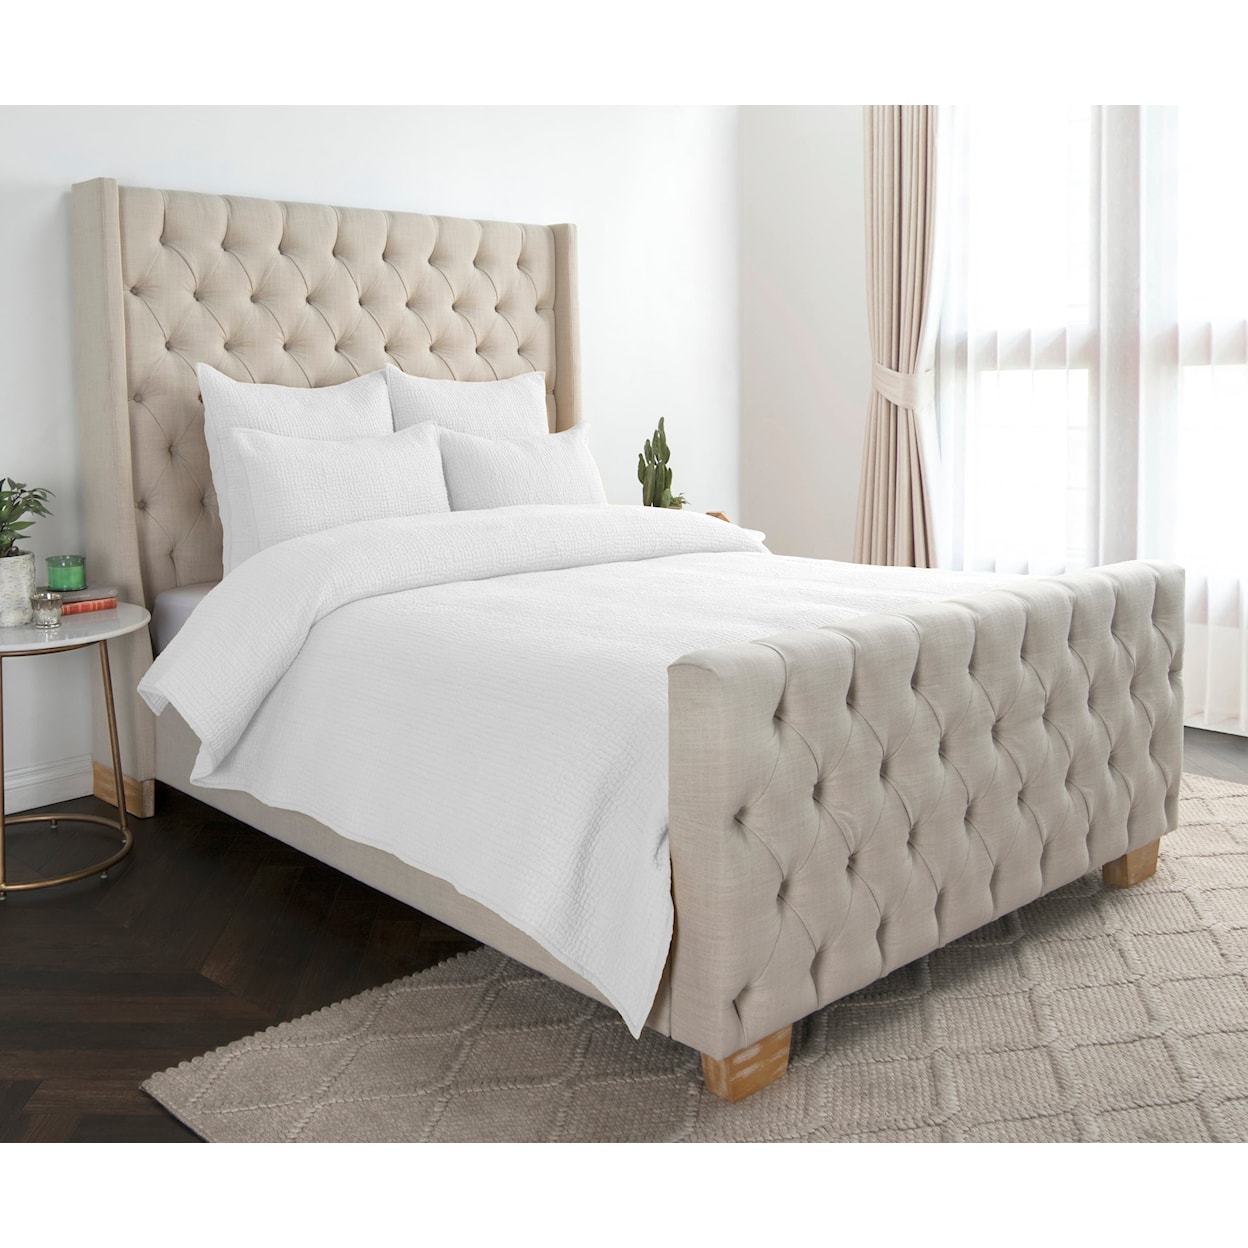 Classic Home Bedding DANICA WHITE 4PC KING QUILT SET